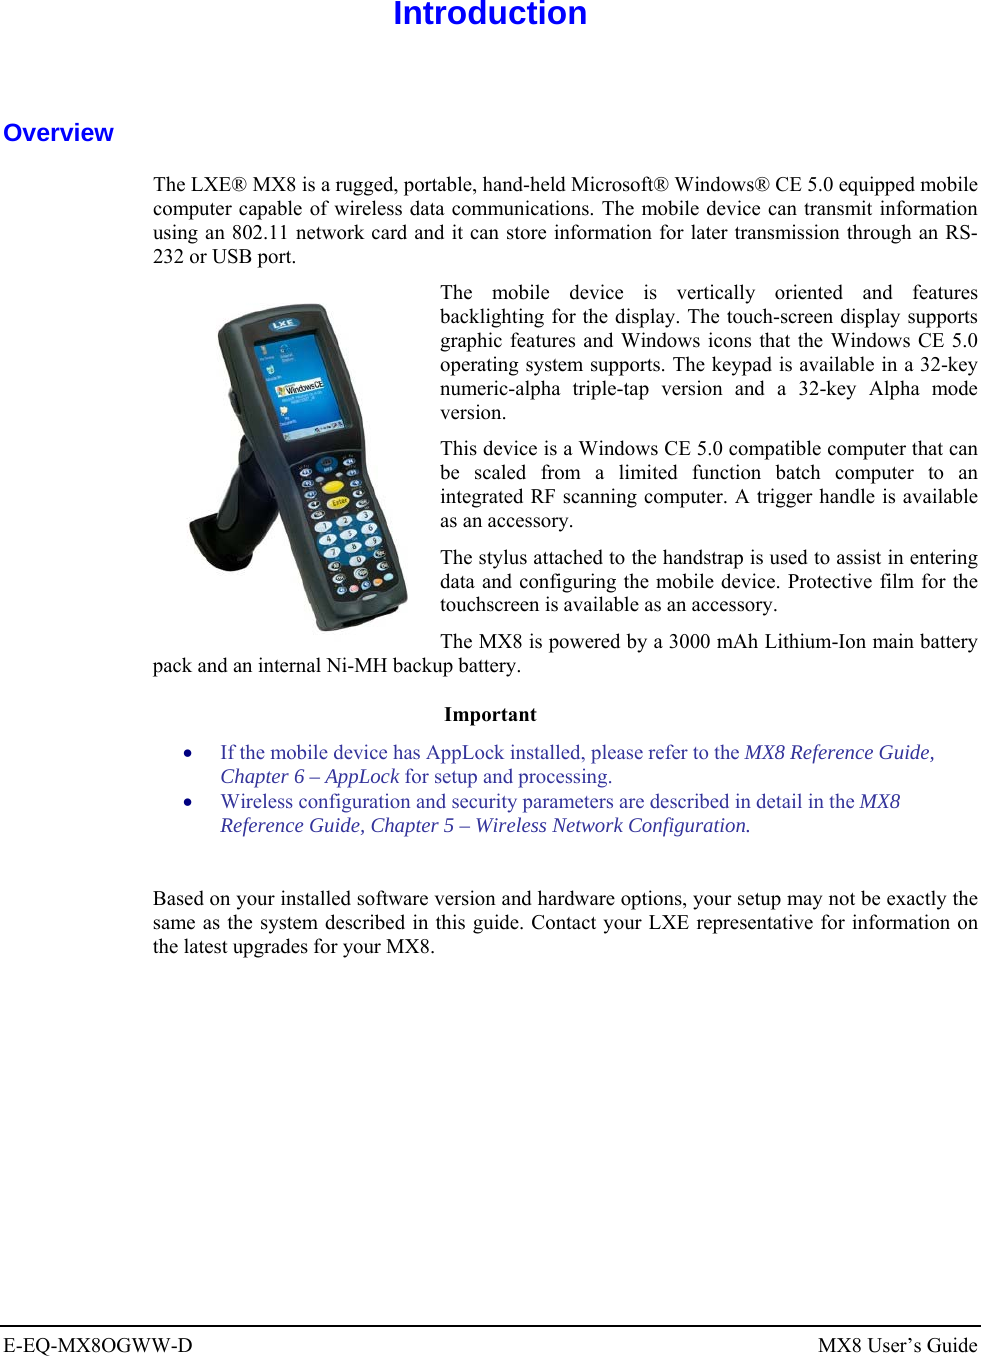  E-EQ-MX8OGWW-D MX8 User’s Guide  Introduction  Overview The LXE® MX8 is a rugged, portable, hand-held Microsoft® Windows® CE 5.0 equipped mobile computer capable of wireless data communications. The mobile device can transmit information using an 802.11 network card and it can store information for later transmission through an RS-232 or USB port.  The mobile device is vertically oriented and features backlighting for the display. The touch-screen display supports graphic features and Windows icons that the Windows CE 5.0 operating system supports. The keypad is available in a 32-key numeric-alpha triple-tap version and a 32-key Alpha mode version. This device is a Windows CE 5.0 compatible computer that can be scaled from a limited function batch computer to an integrated RF scanning computer. A trigger handle is available as an accessory. The stylus attached to the handstrap is used to assist in entering data and configuring the mobile device. Protective film for the touchscreen is available as an accessory. The MX8 is powered by a 3000 mAh Lithium-Ion main battery pack and an internal Ni-MH backup battery. Important • If the mobile device has AppLock installed, please refer to the MX8 Reference Guide, Chapter 6 – AppLock for setup and processing.  • Wireless configuration and security parameters are described in detail in the MX8 Reference Guide, Chapter 5 – Wireless Network Configuration.  Based on your installed software version and hardware options, your setup may not be exactly the same as the system described in this guide. Contact your LXE representative for information on the latest upgrades for your MX8.  